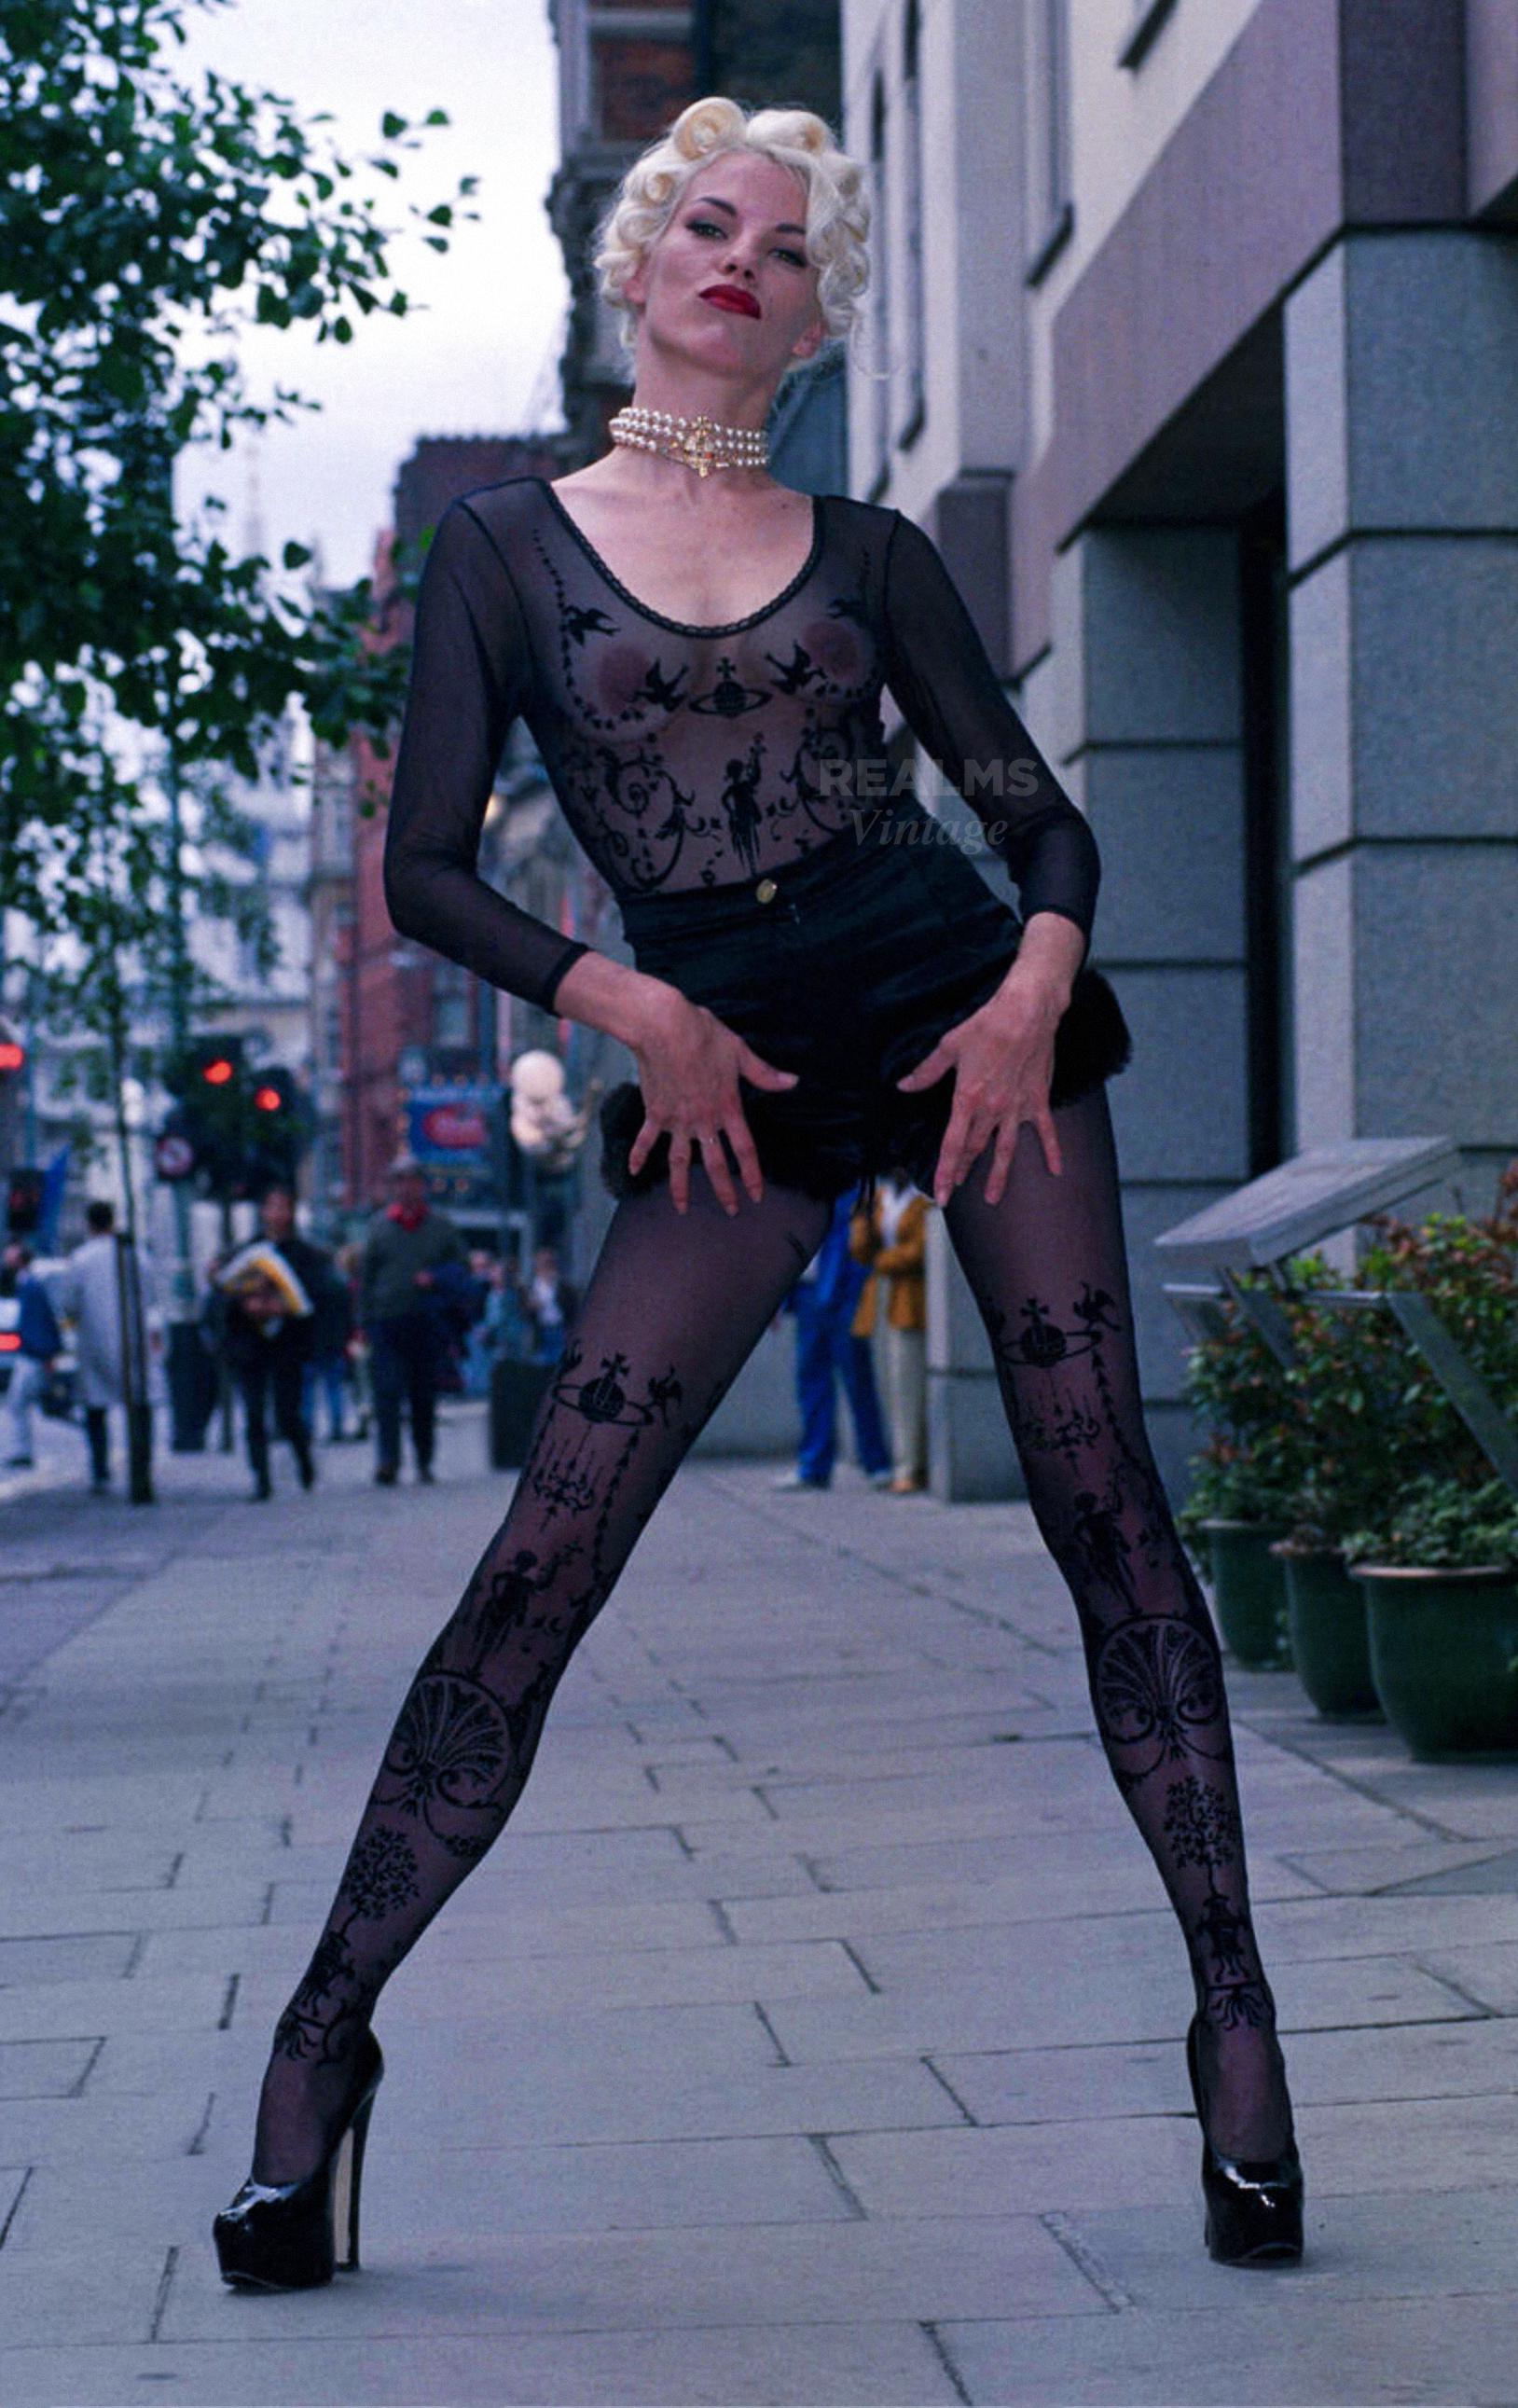 
The stunning 1992 Vivienne Westwood Boulle bodysuit. Iconic Vivienne Westwood Collectors Piece.
Sexy semi sheer black bodysuit featuring the iconic Boulle print.  The material is soft and stretchy formfitting. 
marked size medium